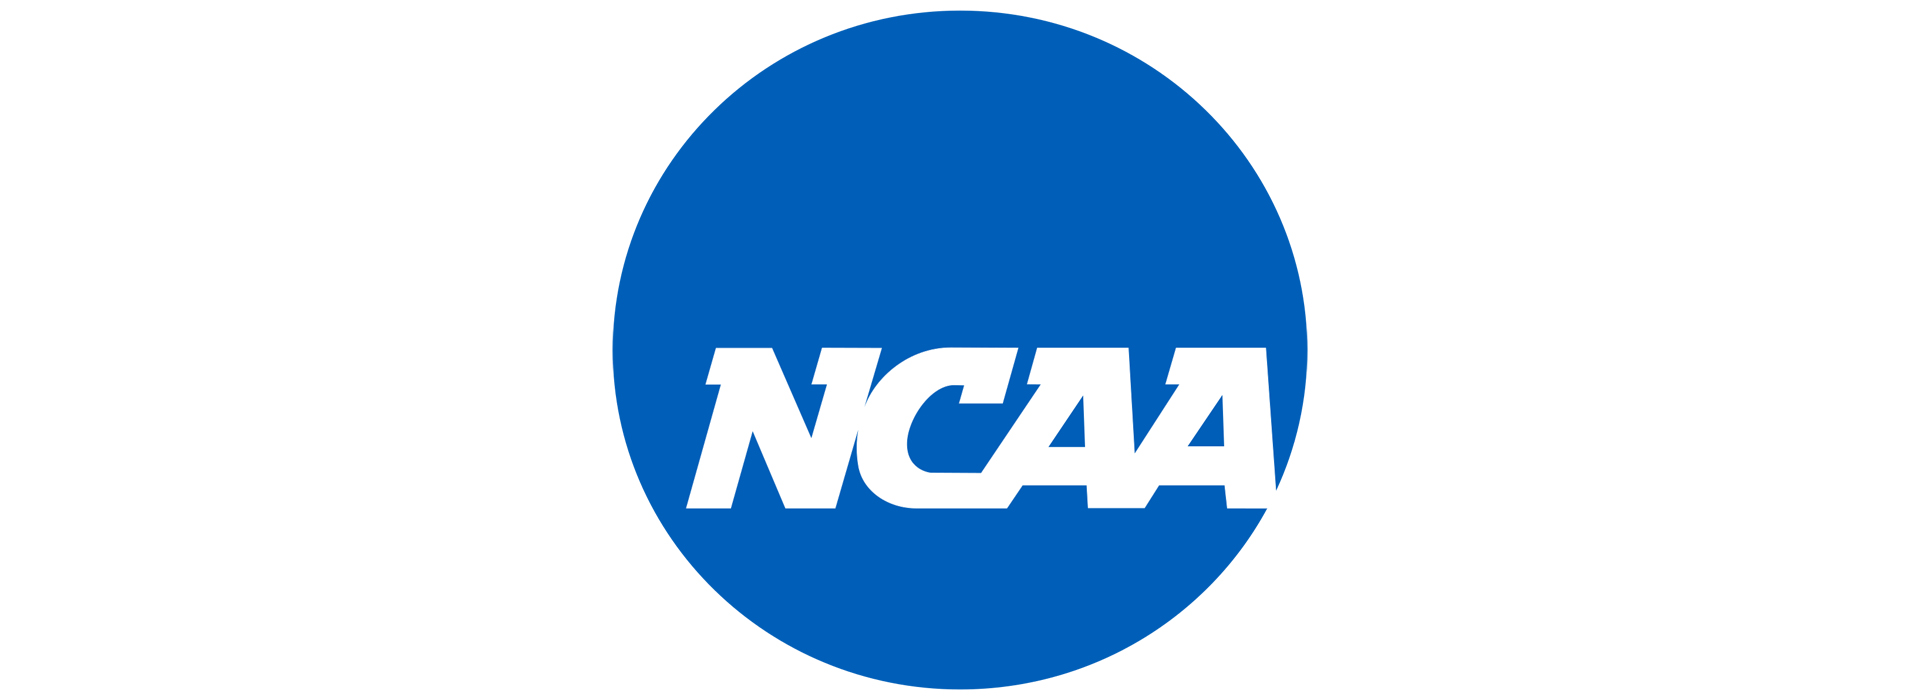 Tech student-athletes maintain impressive marks in latest NCAA Graduation Success Rate report